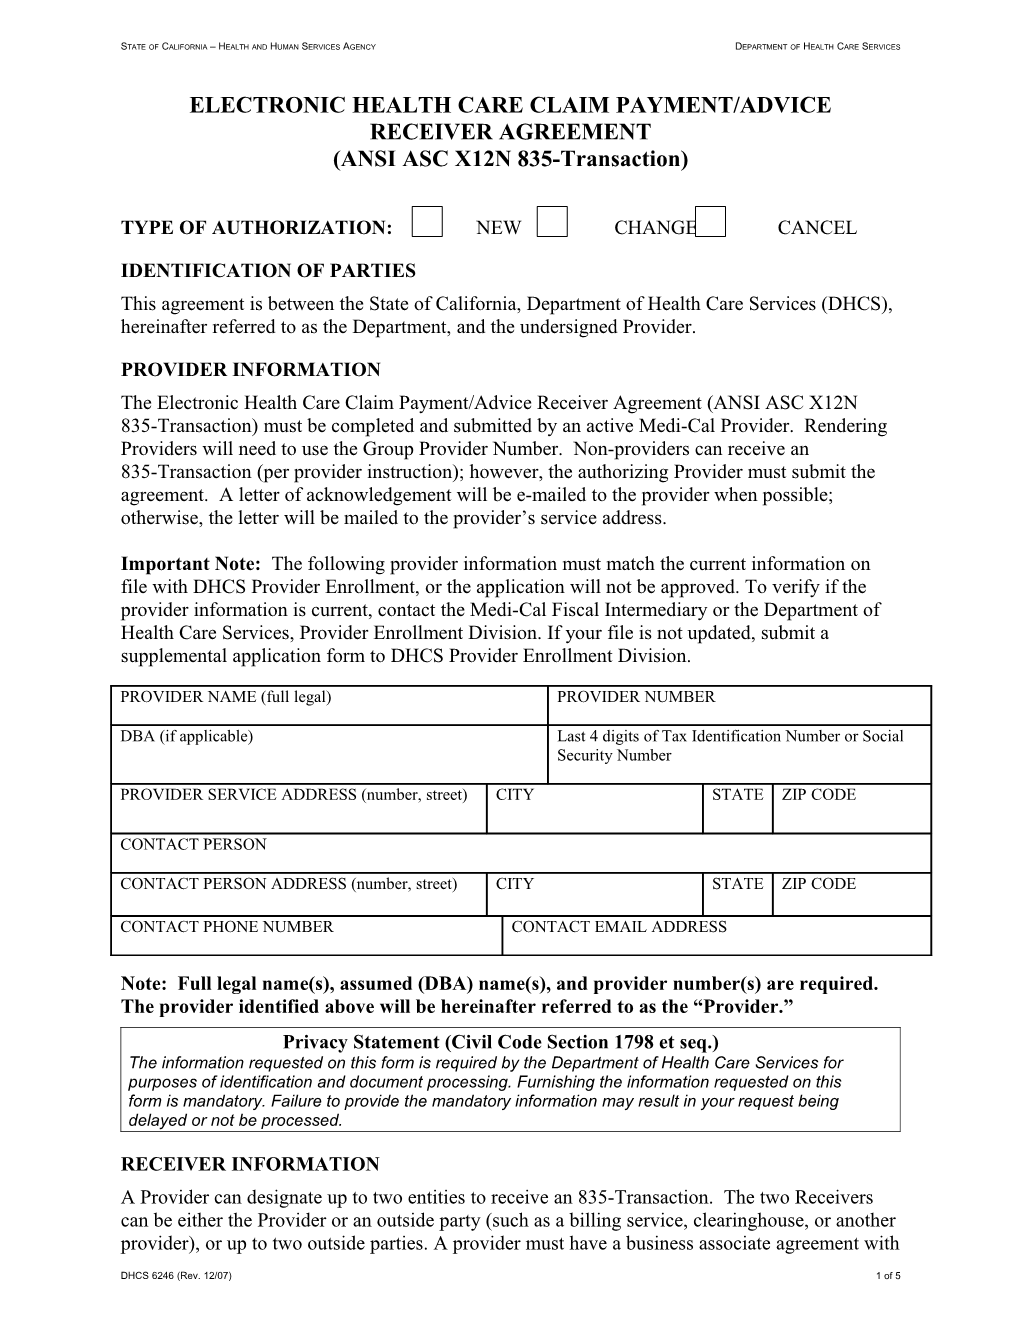 Form: Electronic Health Care Claim Payment/Advice Receiver Agreement (ANSI ASC X12N 835